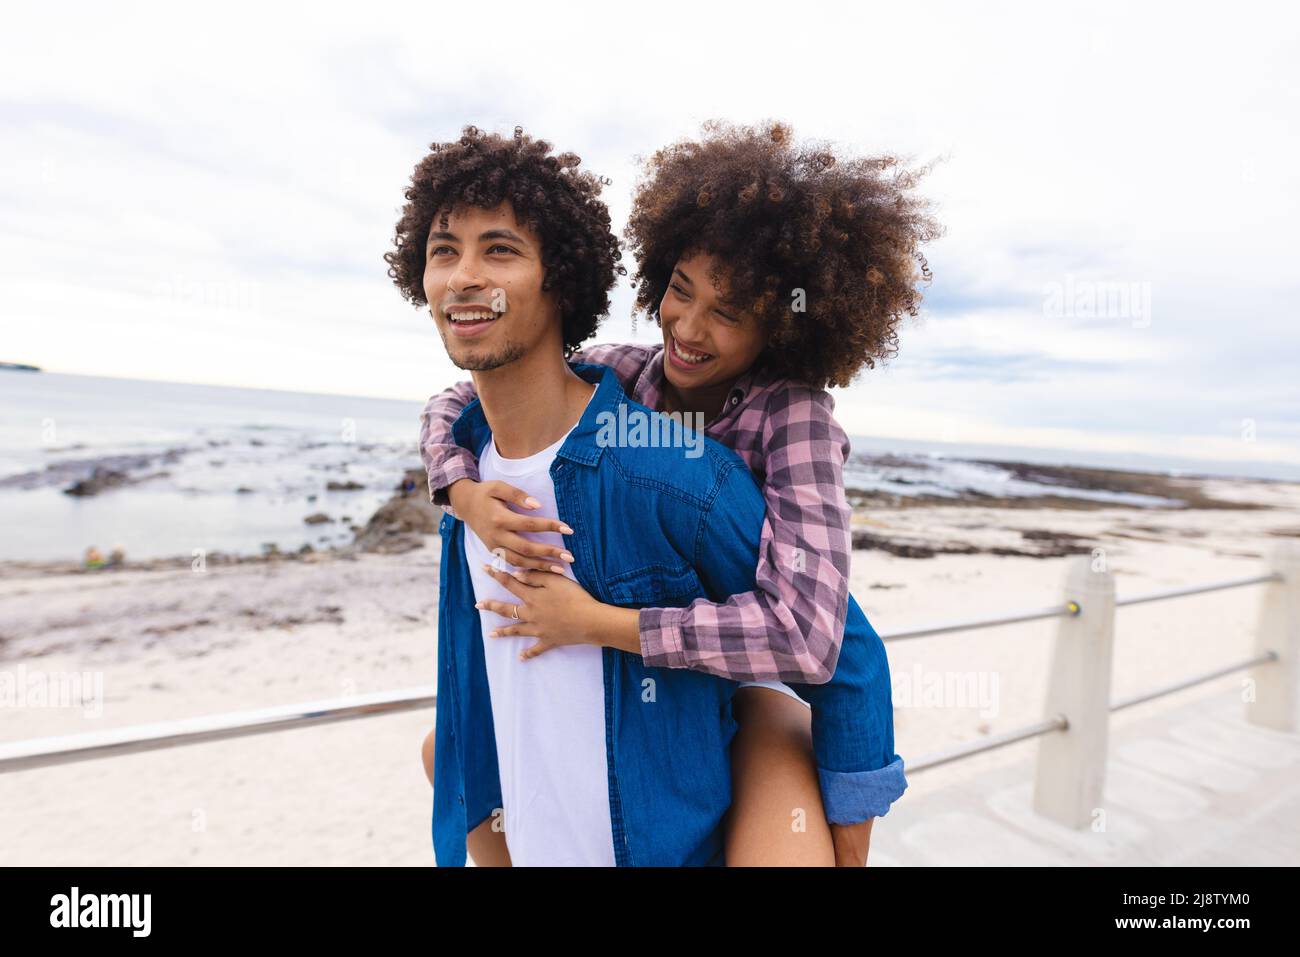 Smiling young man piggybacking afro african american girlfriend by beach, copy space Stock Photo